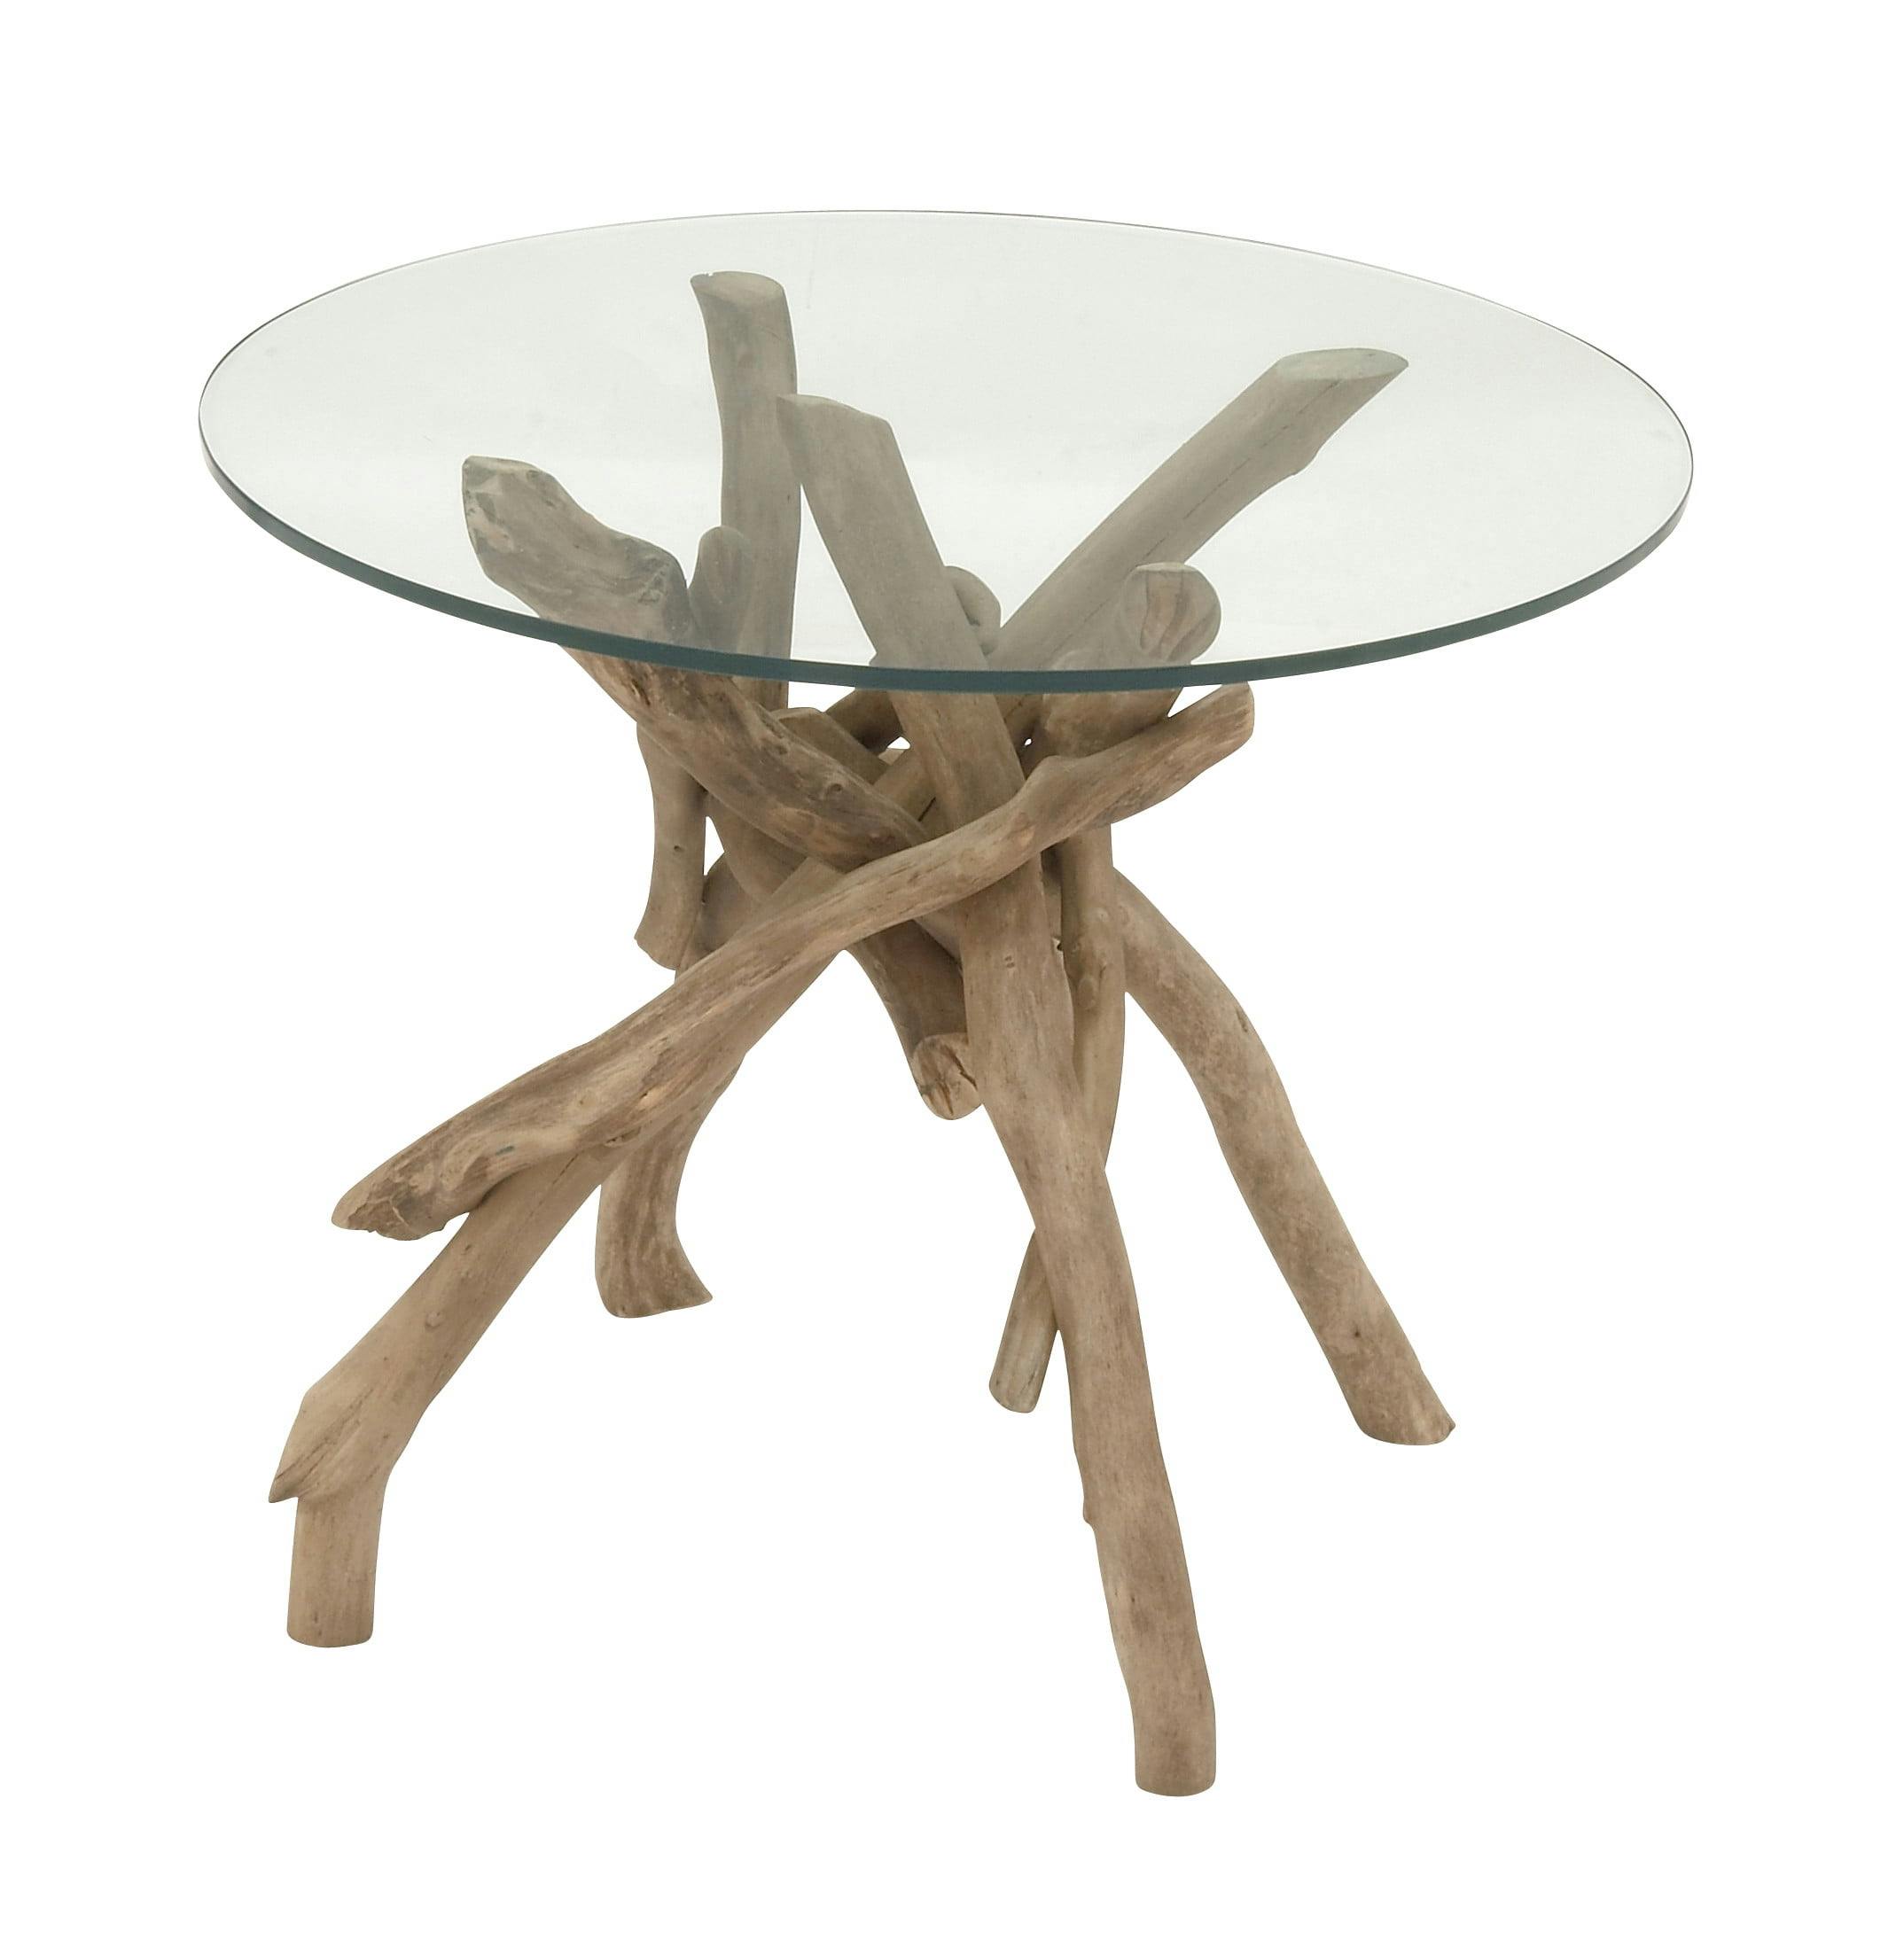 Driftwood Round Glass-Top End Table, 21" x 19"